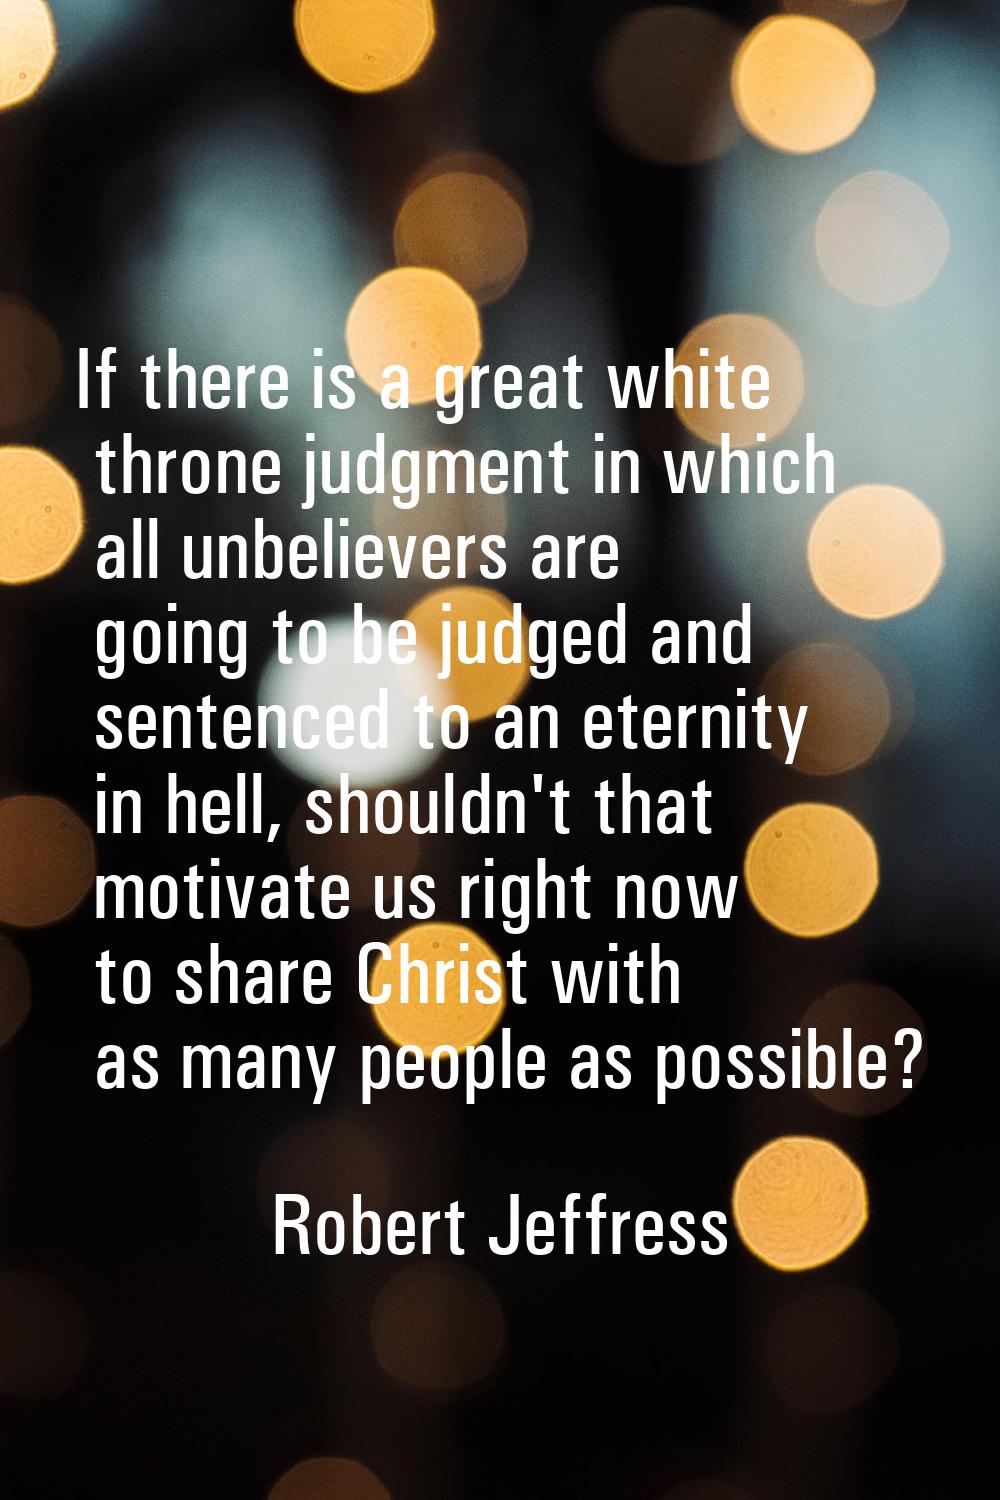 If there is a great white throne judgment in which all unbelievers are going to be judged and sente